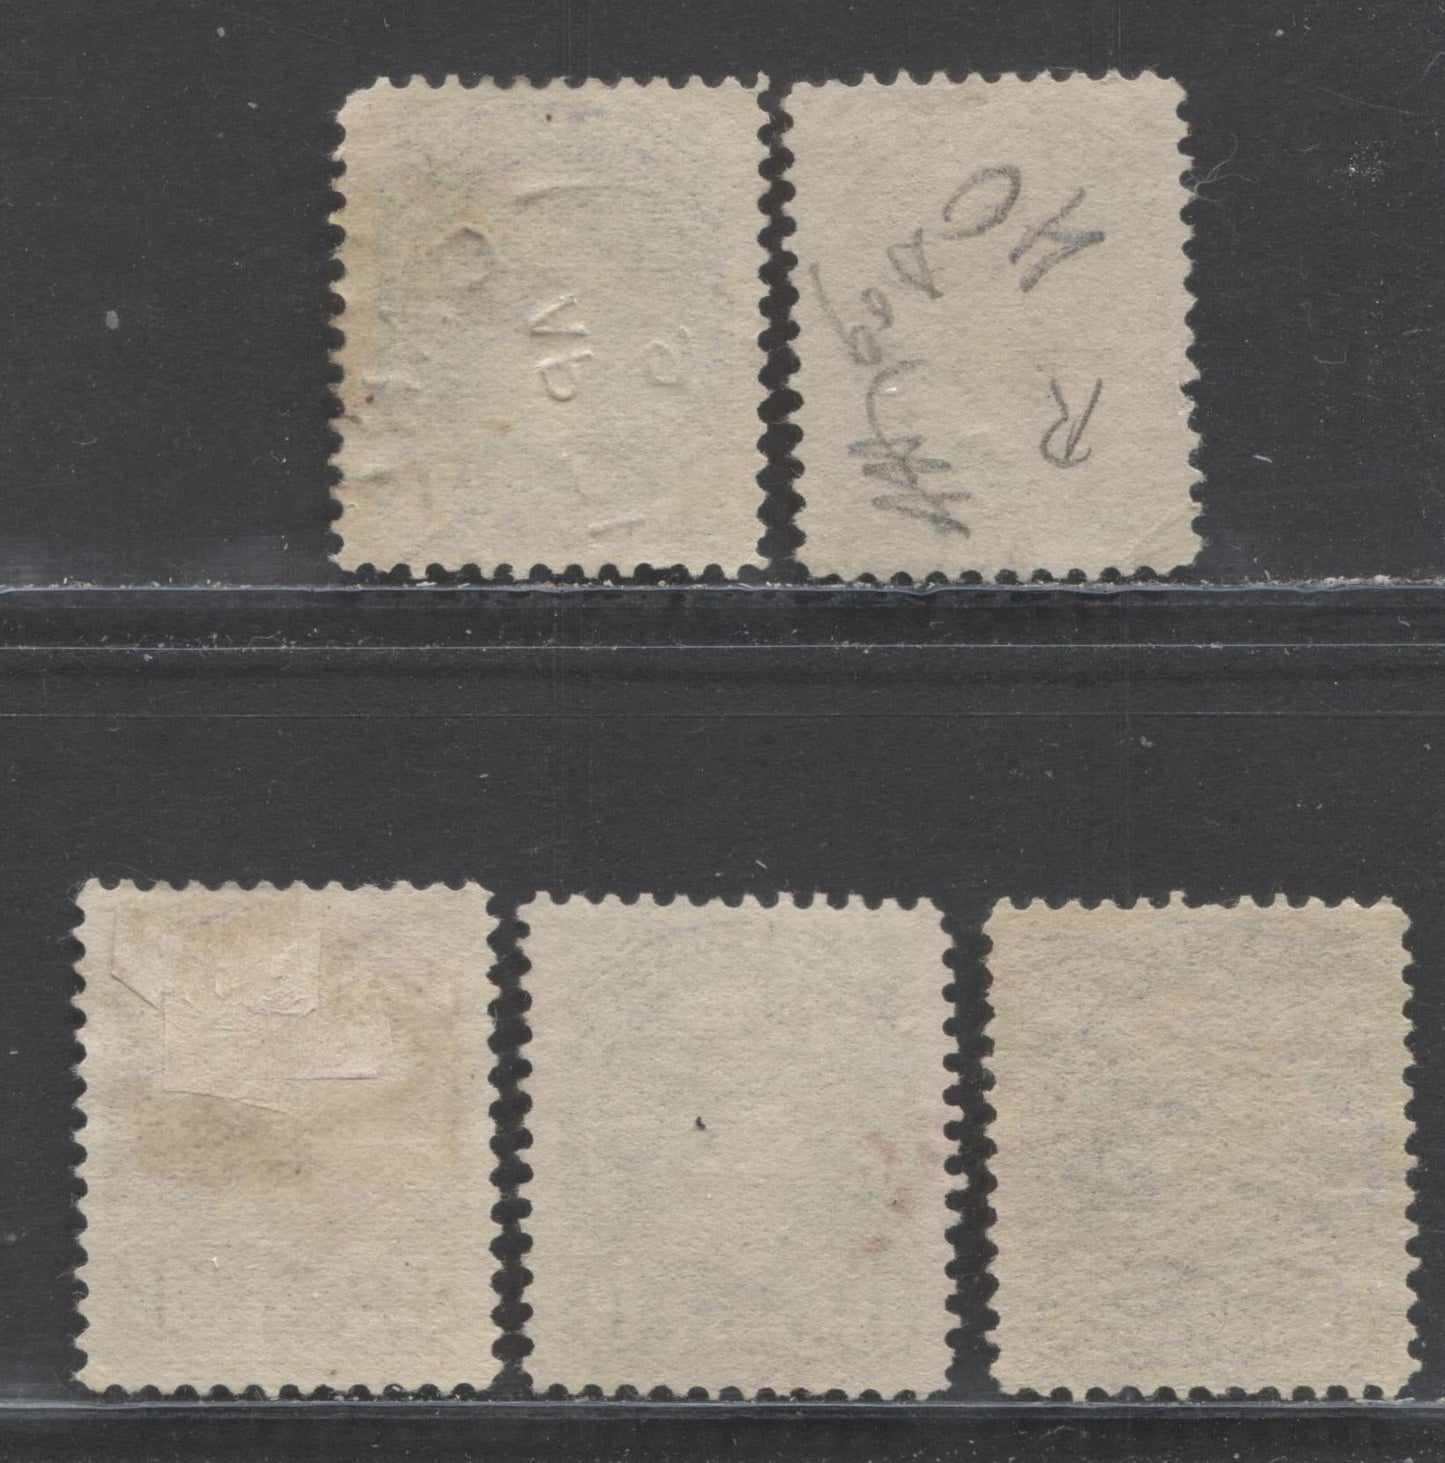 Lot 203 Canada #44-44c 8c Violet Black - Gray Queen Victoria, 1870-1897 Small Queen Issue, 5 Very Fine Used Examples Of The 2nd Ottawa Printings On Soft Horizontal Wove Paper